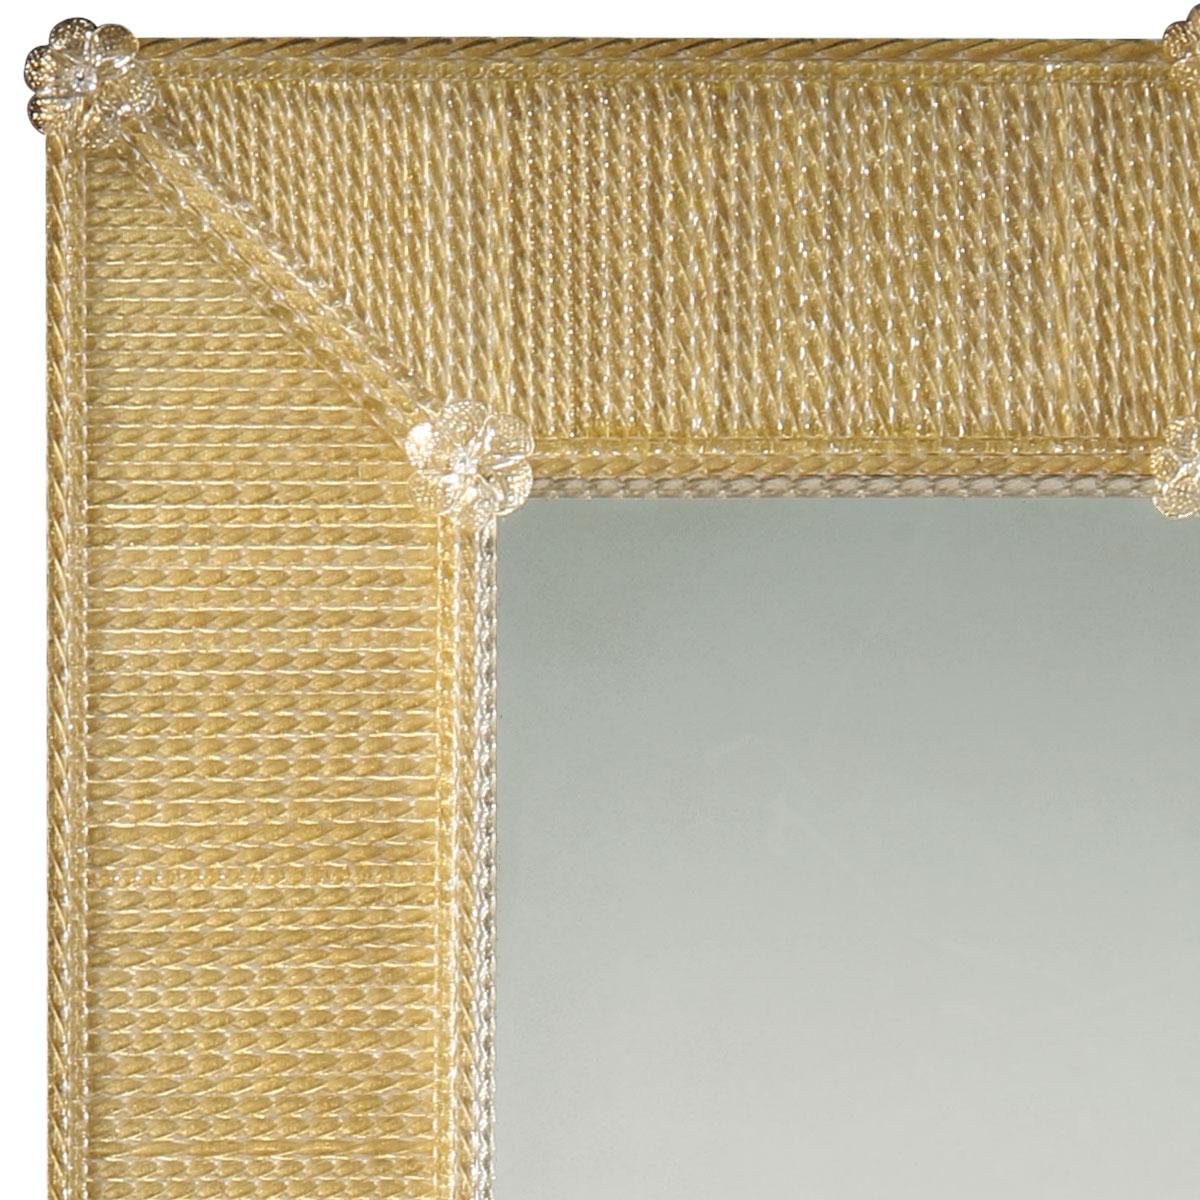 Beautiful Venetian Mirror in gold color inspired by the beautiful 